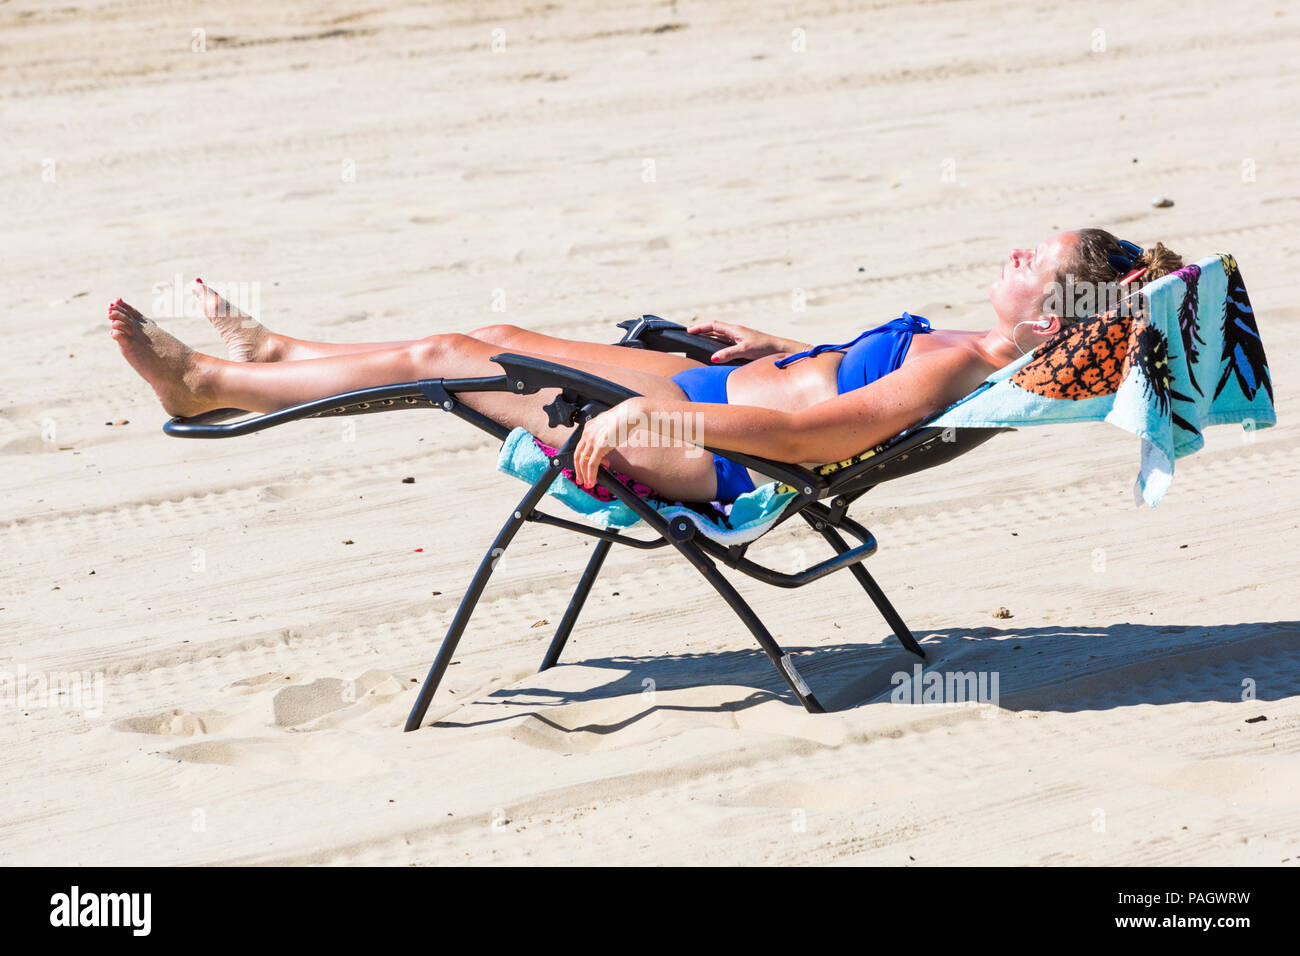 Bournemouth, Dorset, UK. 23rd July 2018. UK weather: the heatwave continues as temperatures rise on a scorching hot and sunny day at Bournemouth beaches with blue skies and unbroken sunshine. Sunseekers head to the seaside to soak up the sun. Woman sunbathing at the beach. Credit: Carolyn Jenkins/Alamy Live News Stock Photo